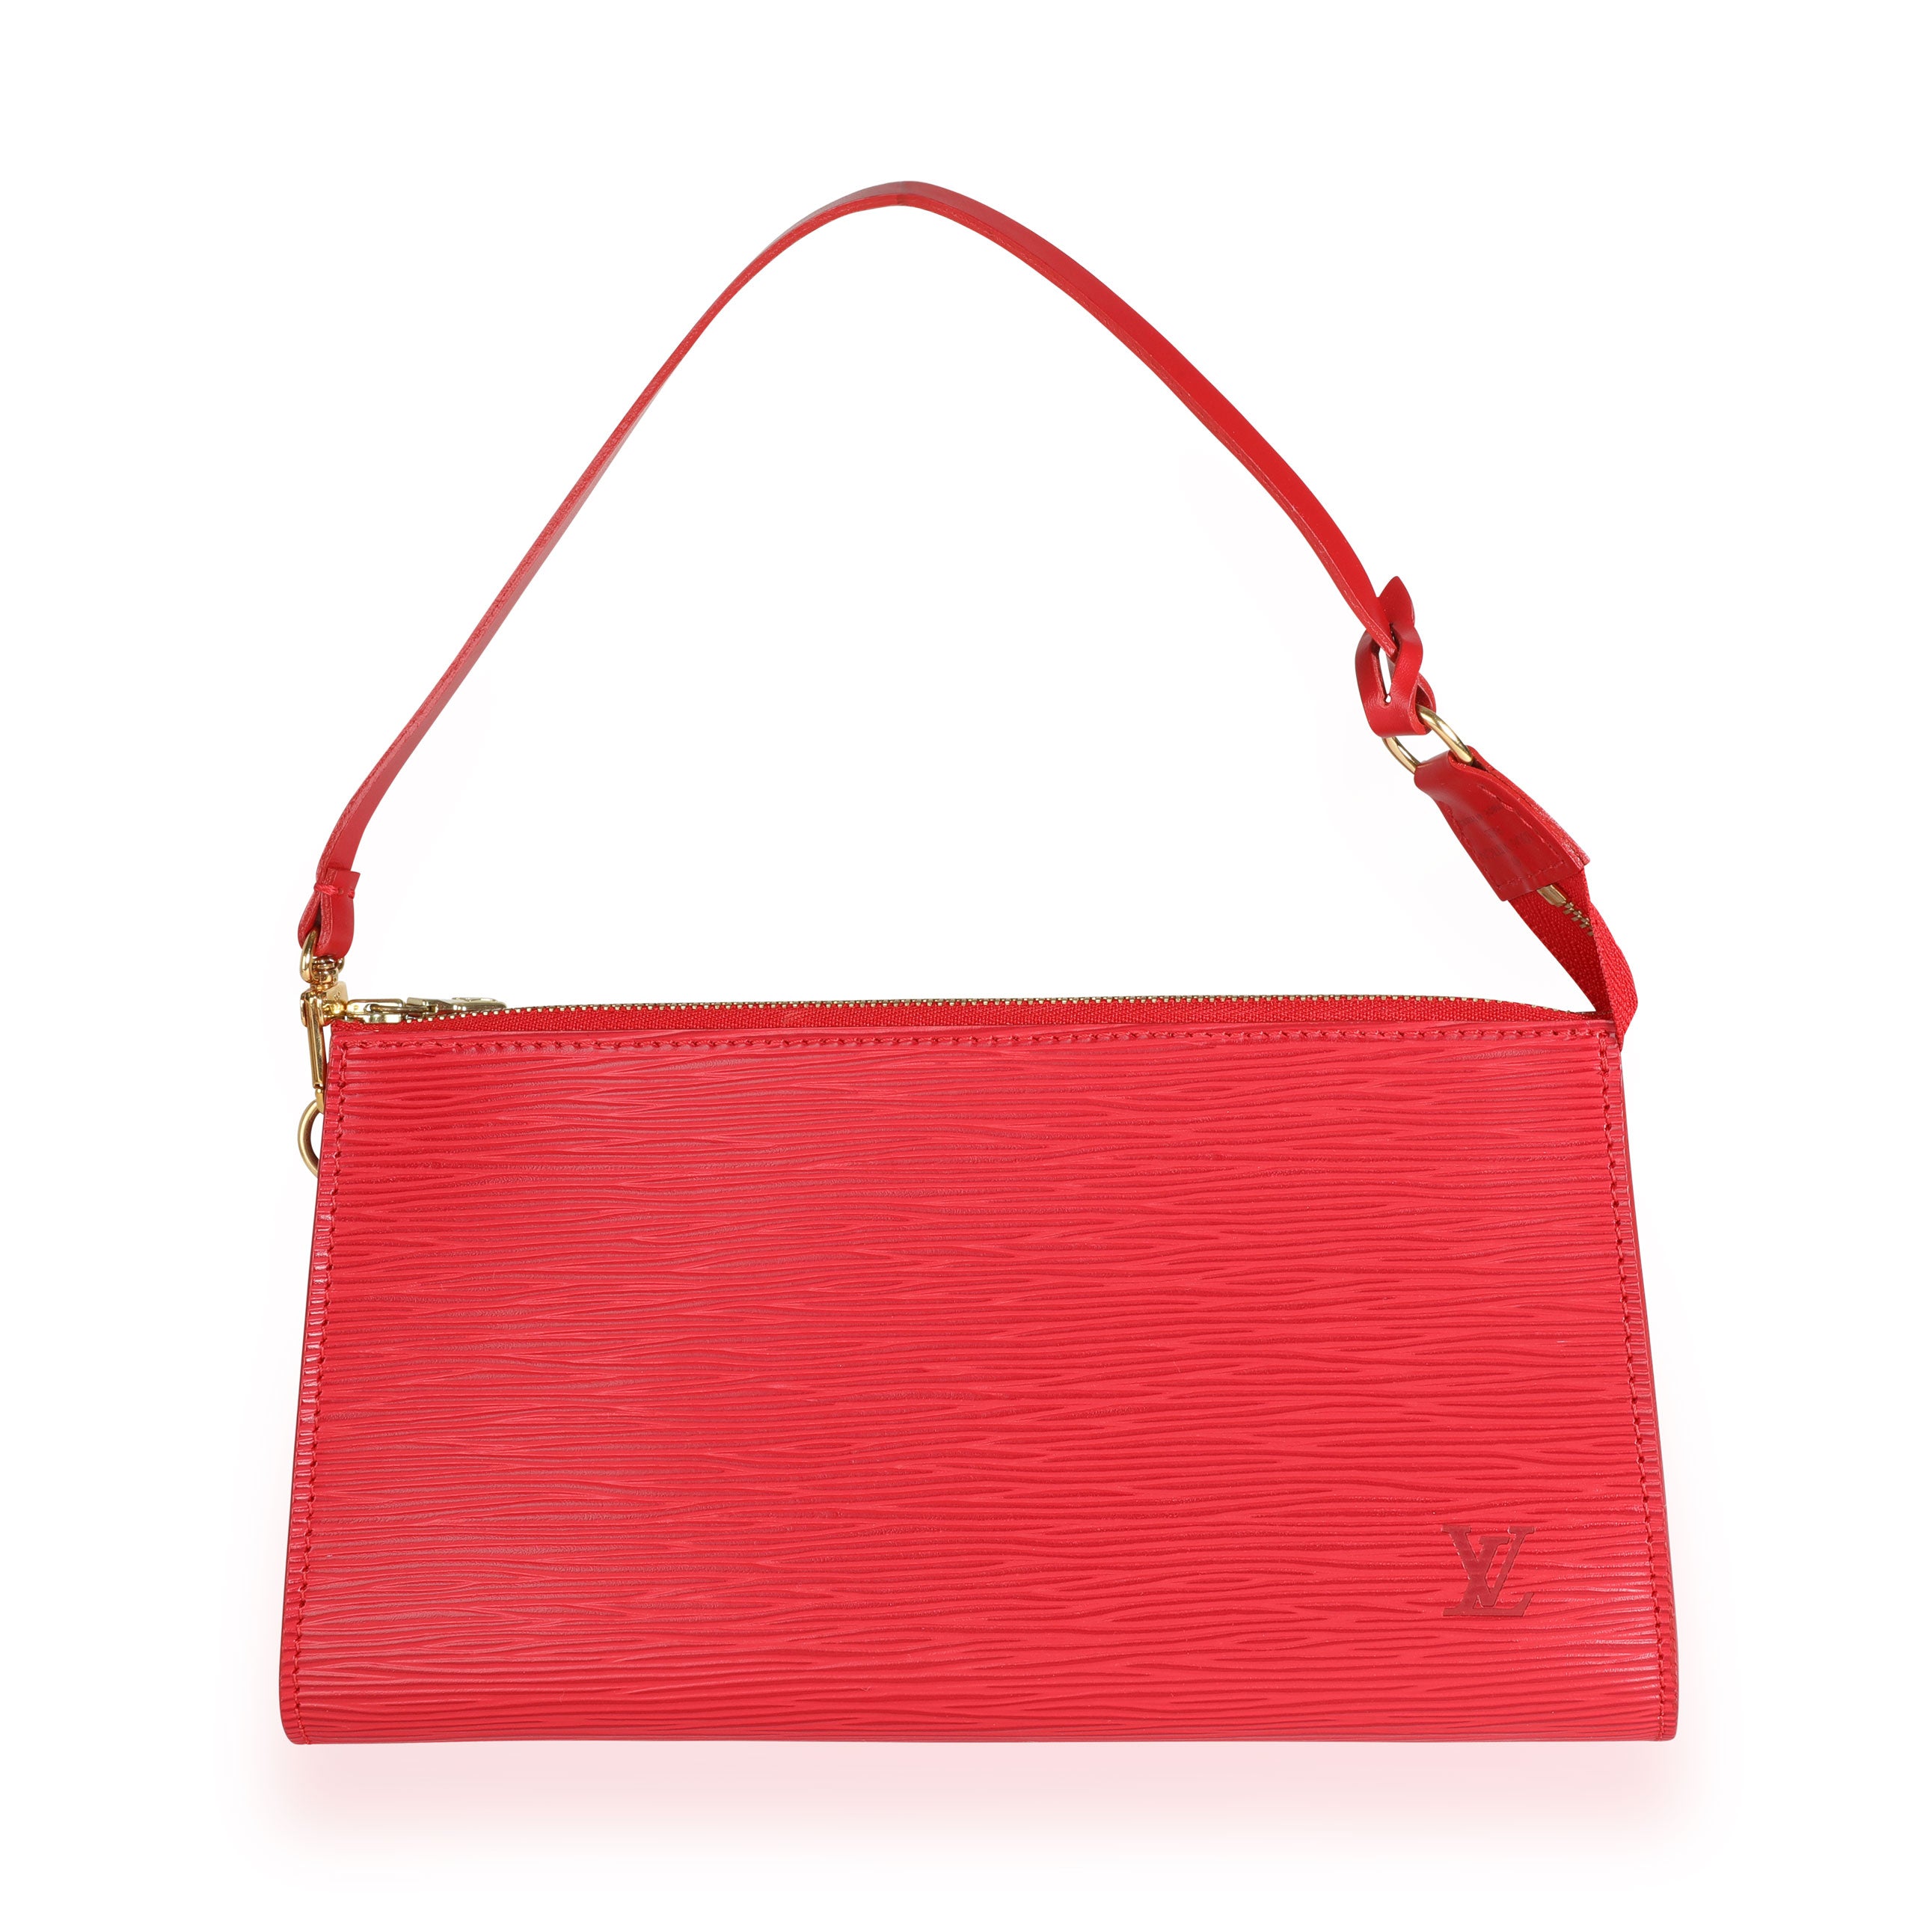 Louis Vuitton Red Epi Leather Twisted Tote Bag, myGemma